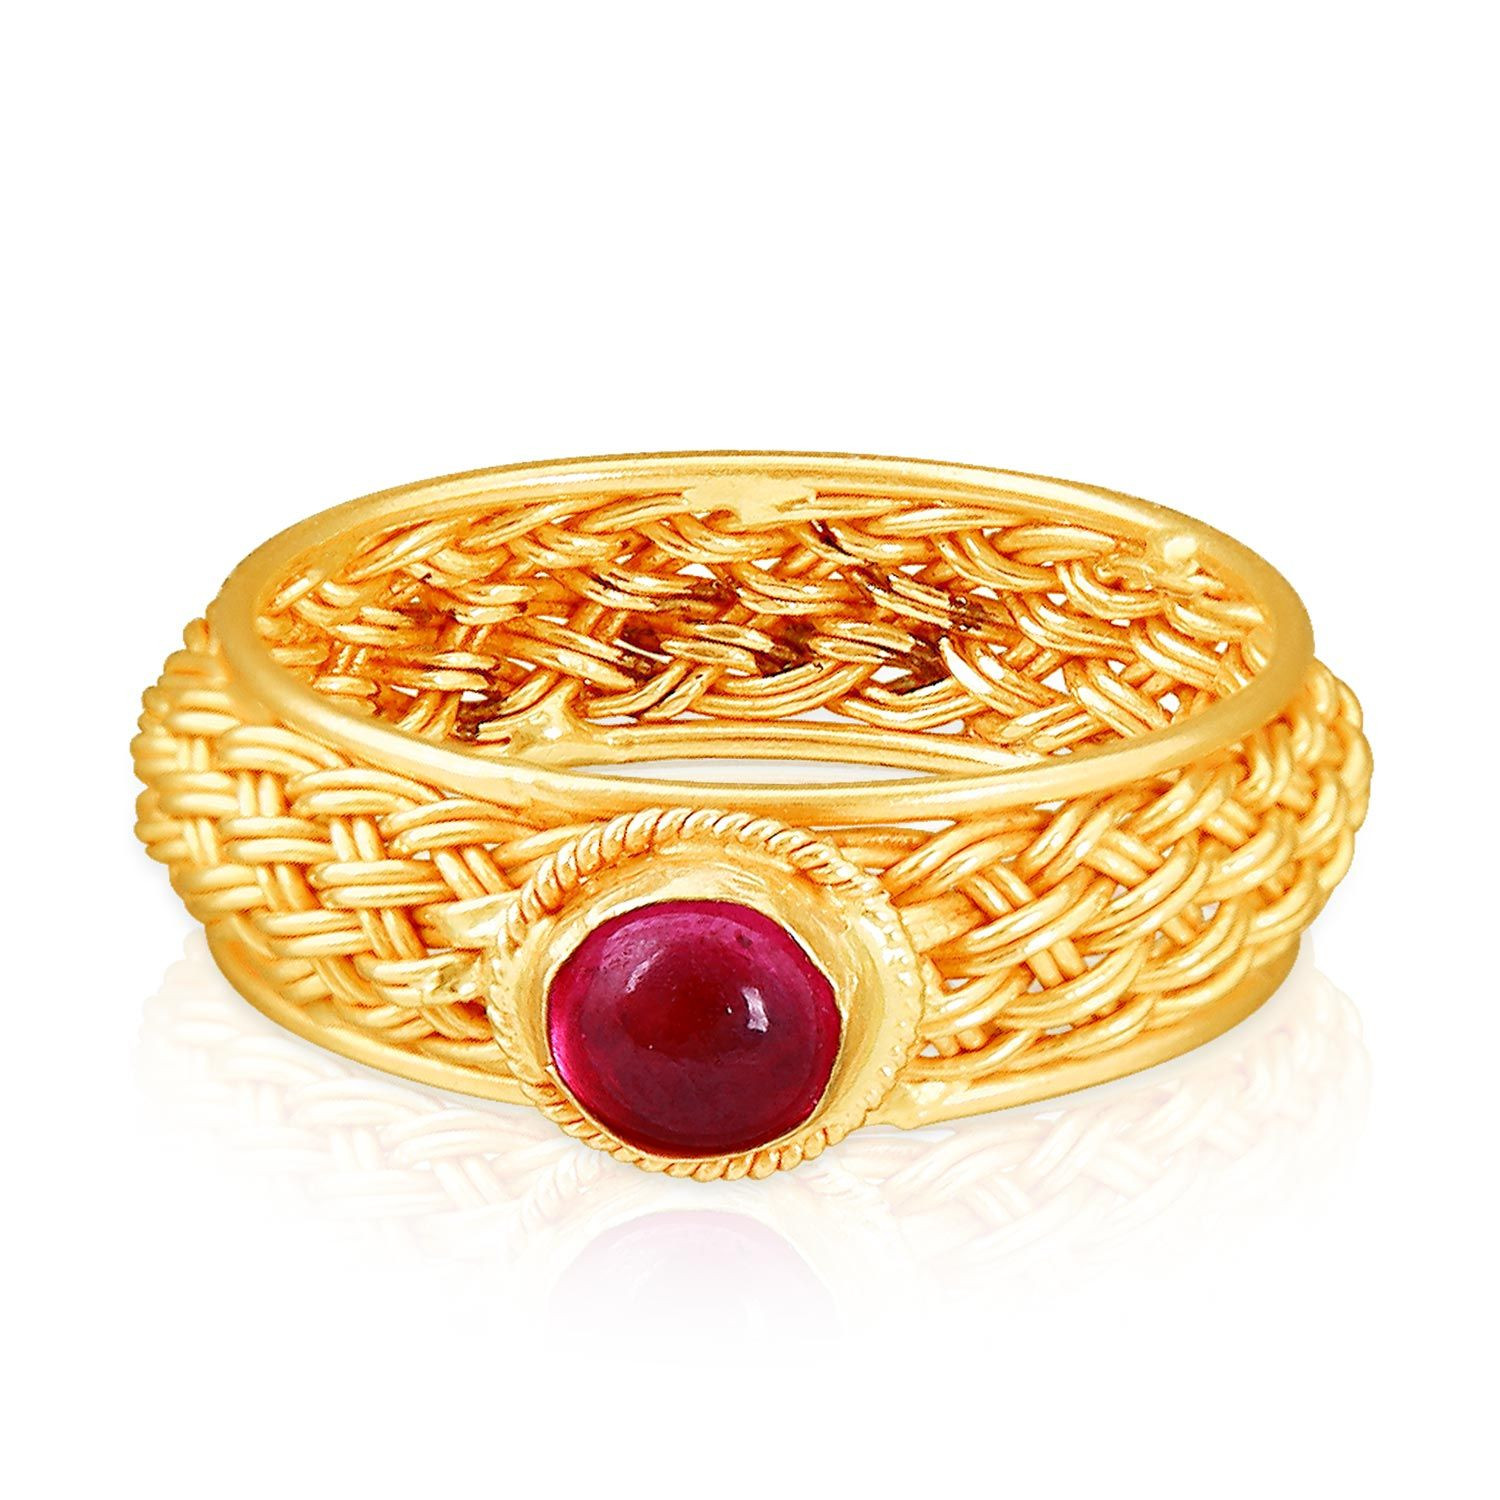 Mangalore bunt traditional V shape ring | Gold jewellery design necklaces,  Gold earrings designs, Gold bangles design